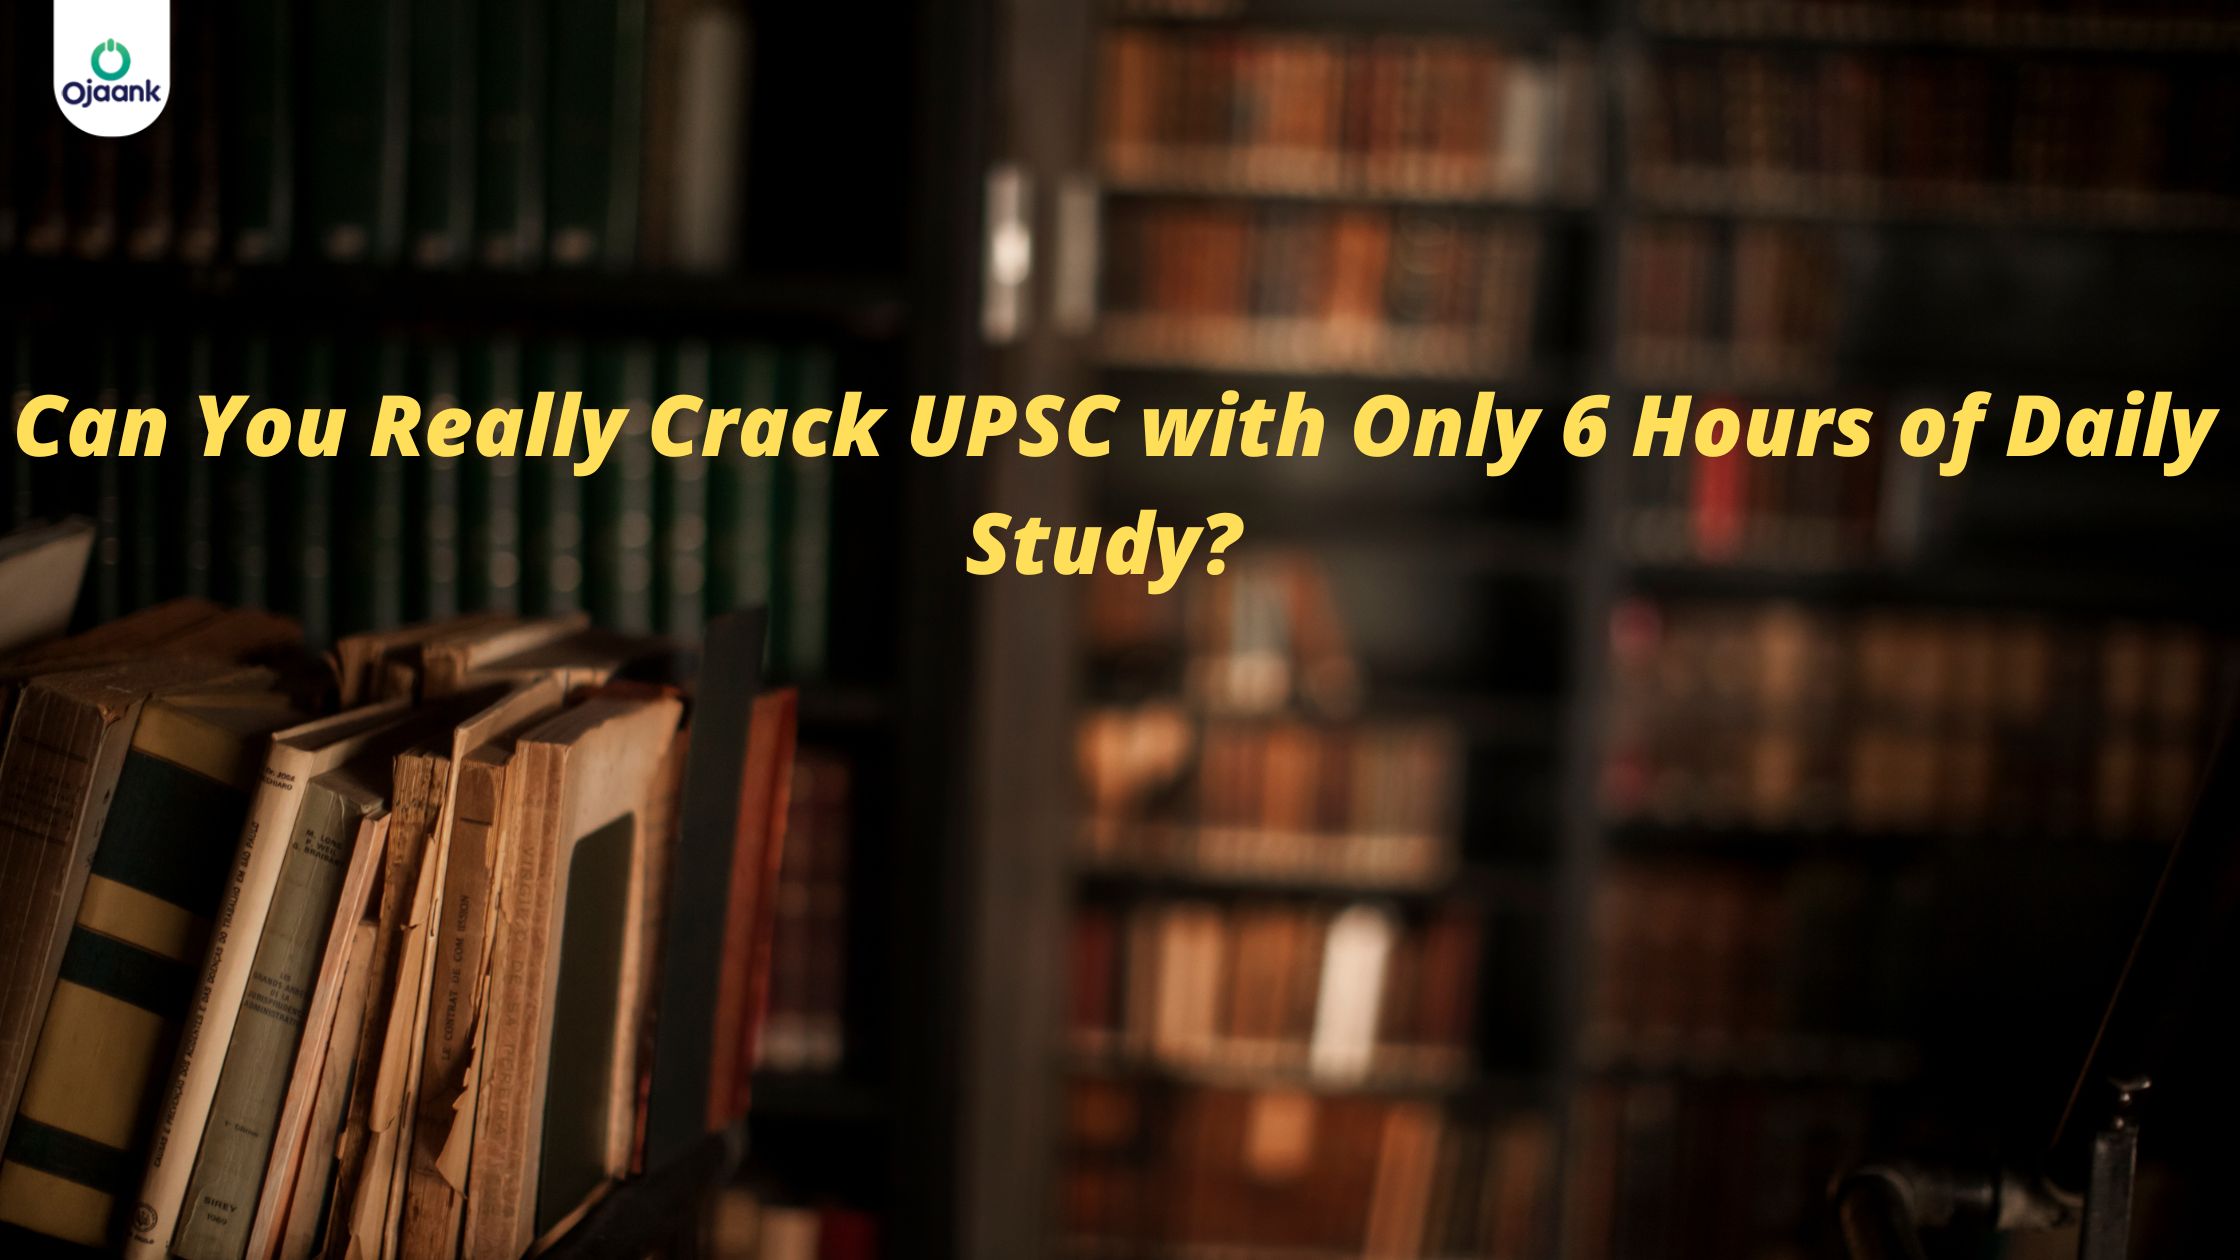 Can You Really Crack UPSC with Only 6 Hours of Daily Study?